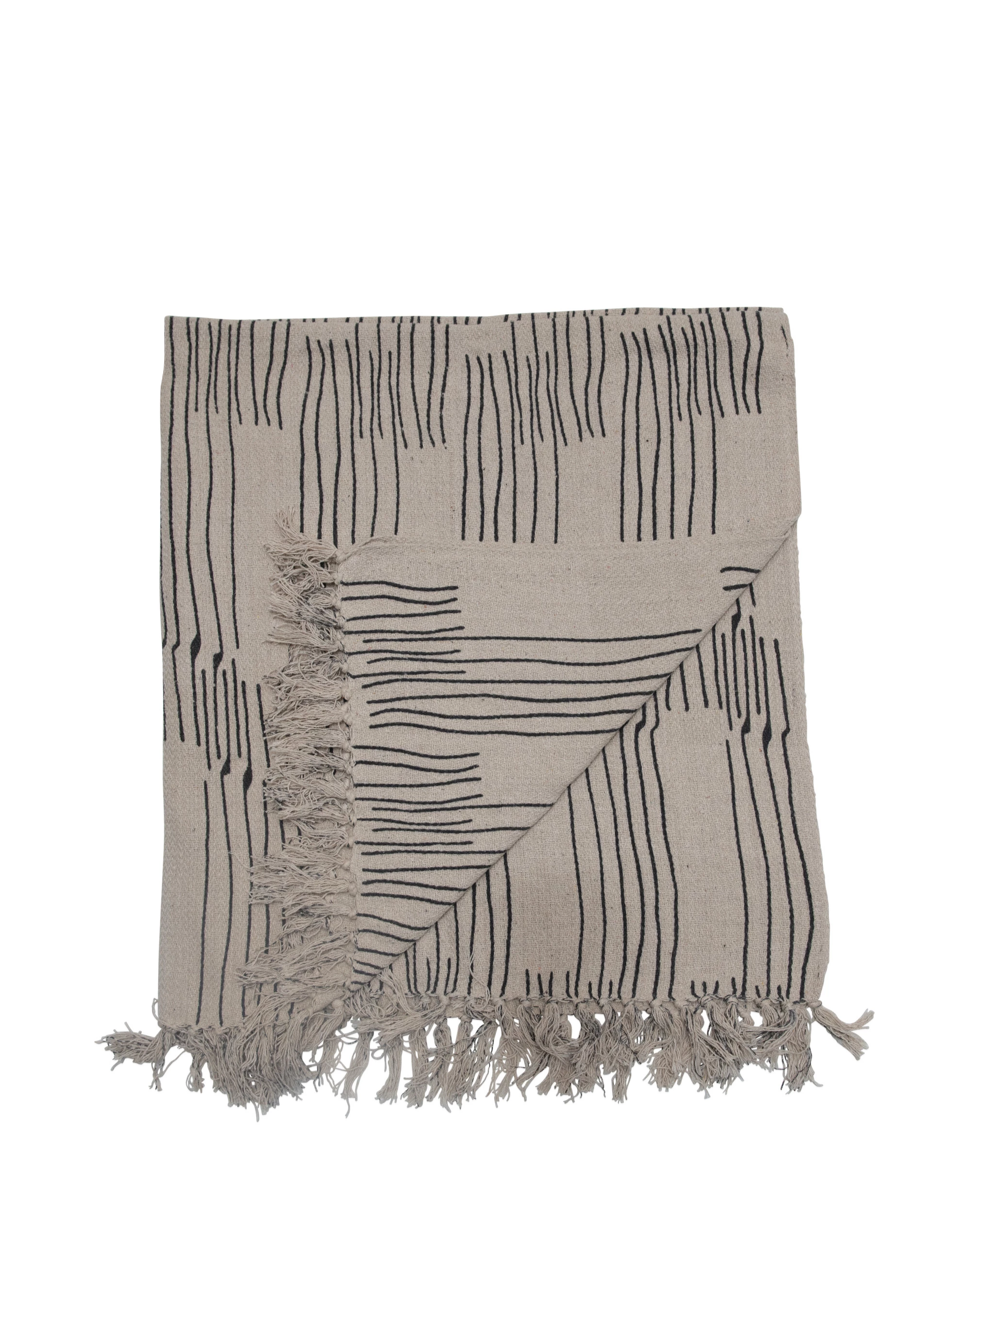 recycled line pattern throw